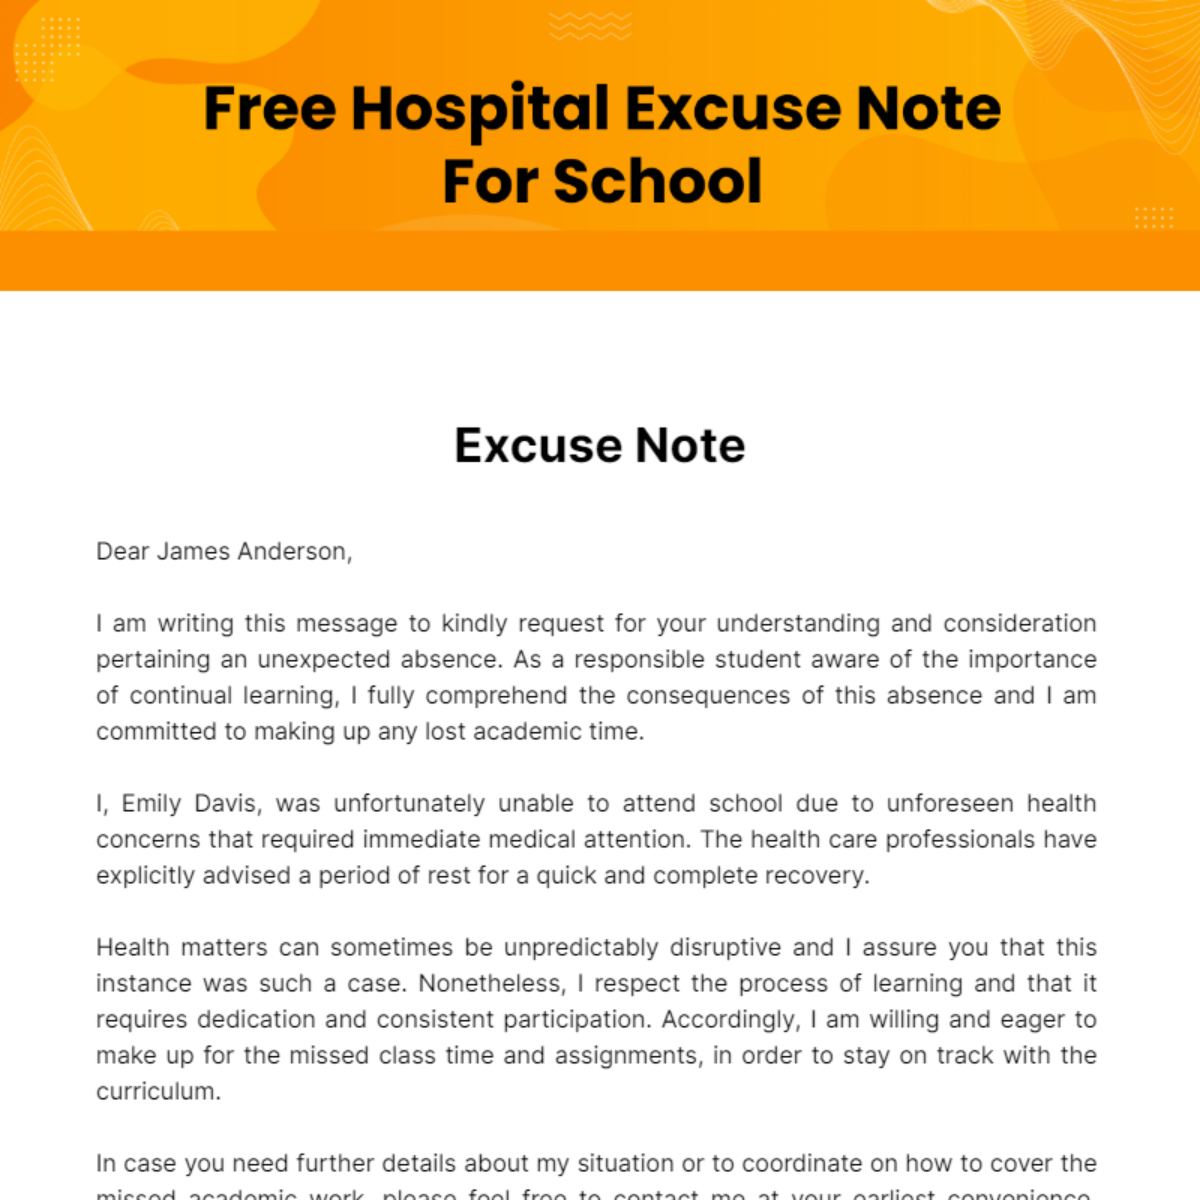 Hospital Excuse Note For School Template